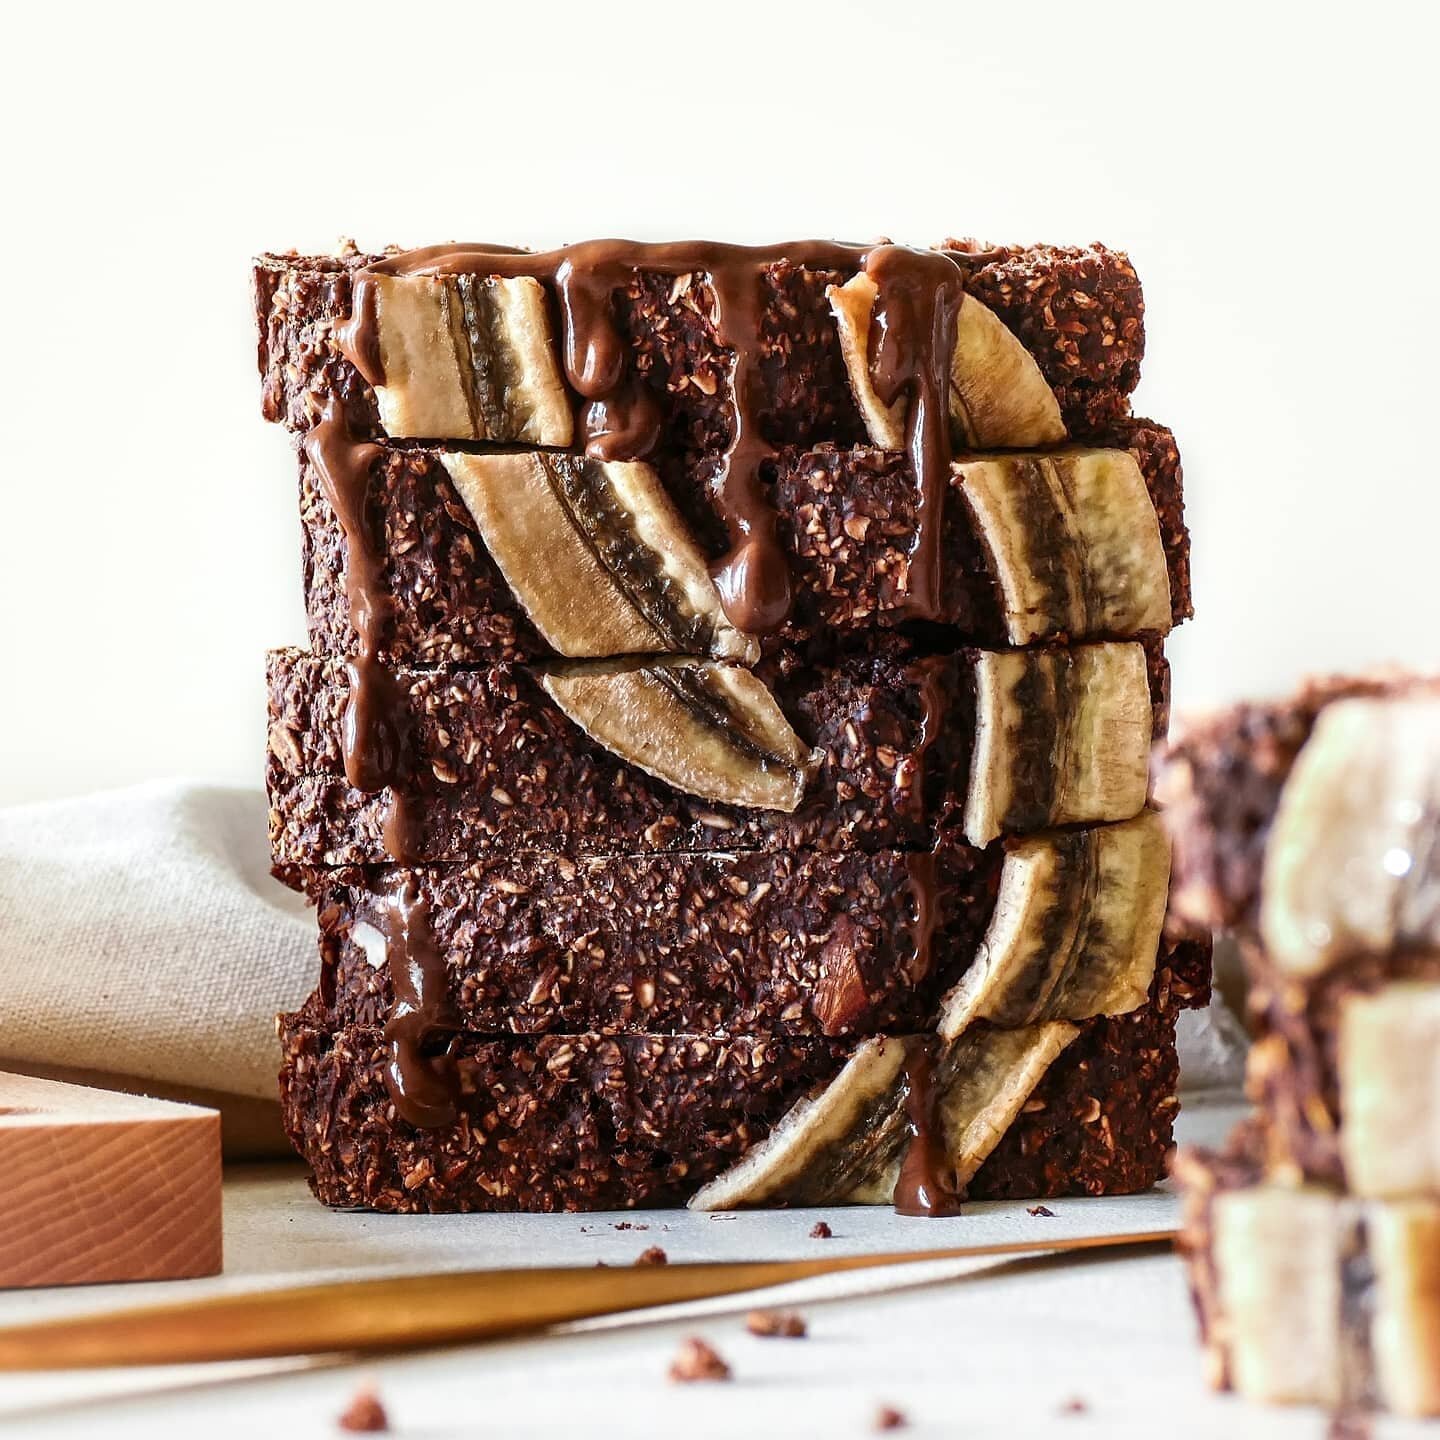 🍫🍌 Chocolate Banana Bread - I guess it's time to take your vegan banana bread to the next level. If you love chocolate and you couldn't live without it, this is the perfect recipe for you. Simple, tasty and gluten free!😍
As always you can find the